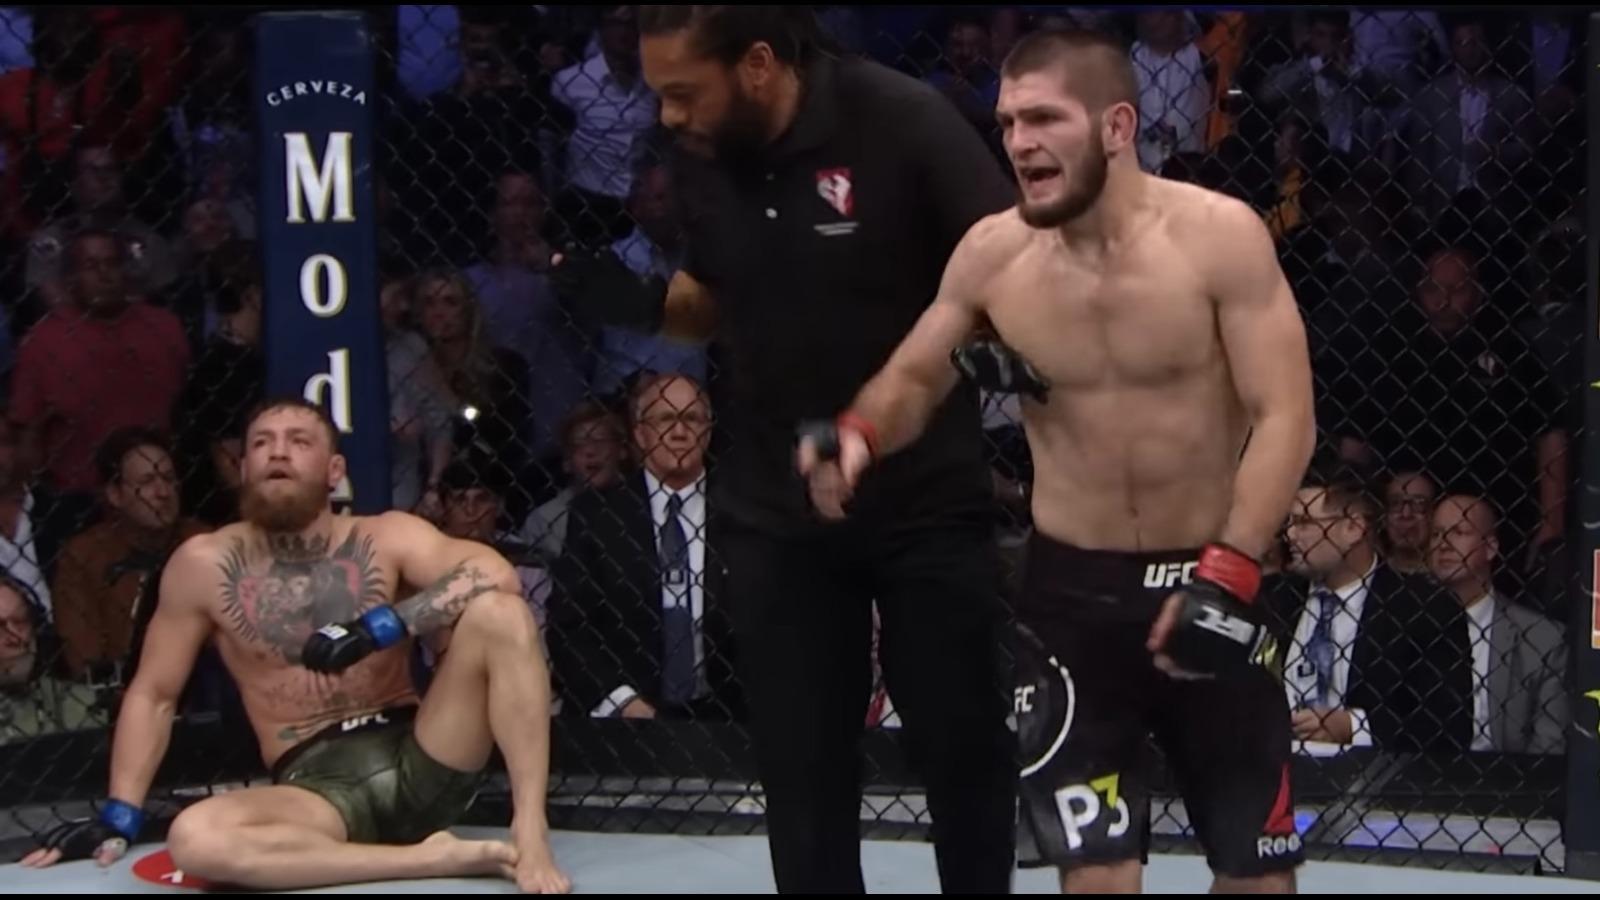 Khabib Nurmagomedov’s trainer explains why he wants Conor McGregor to return to the UFC so badly